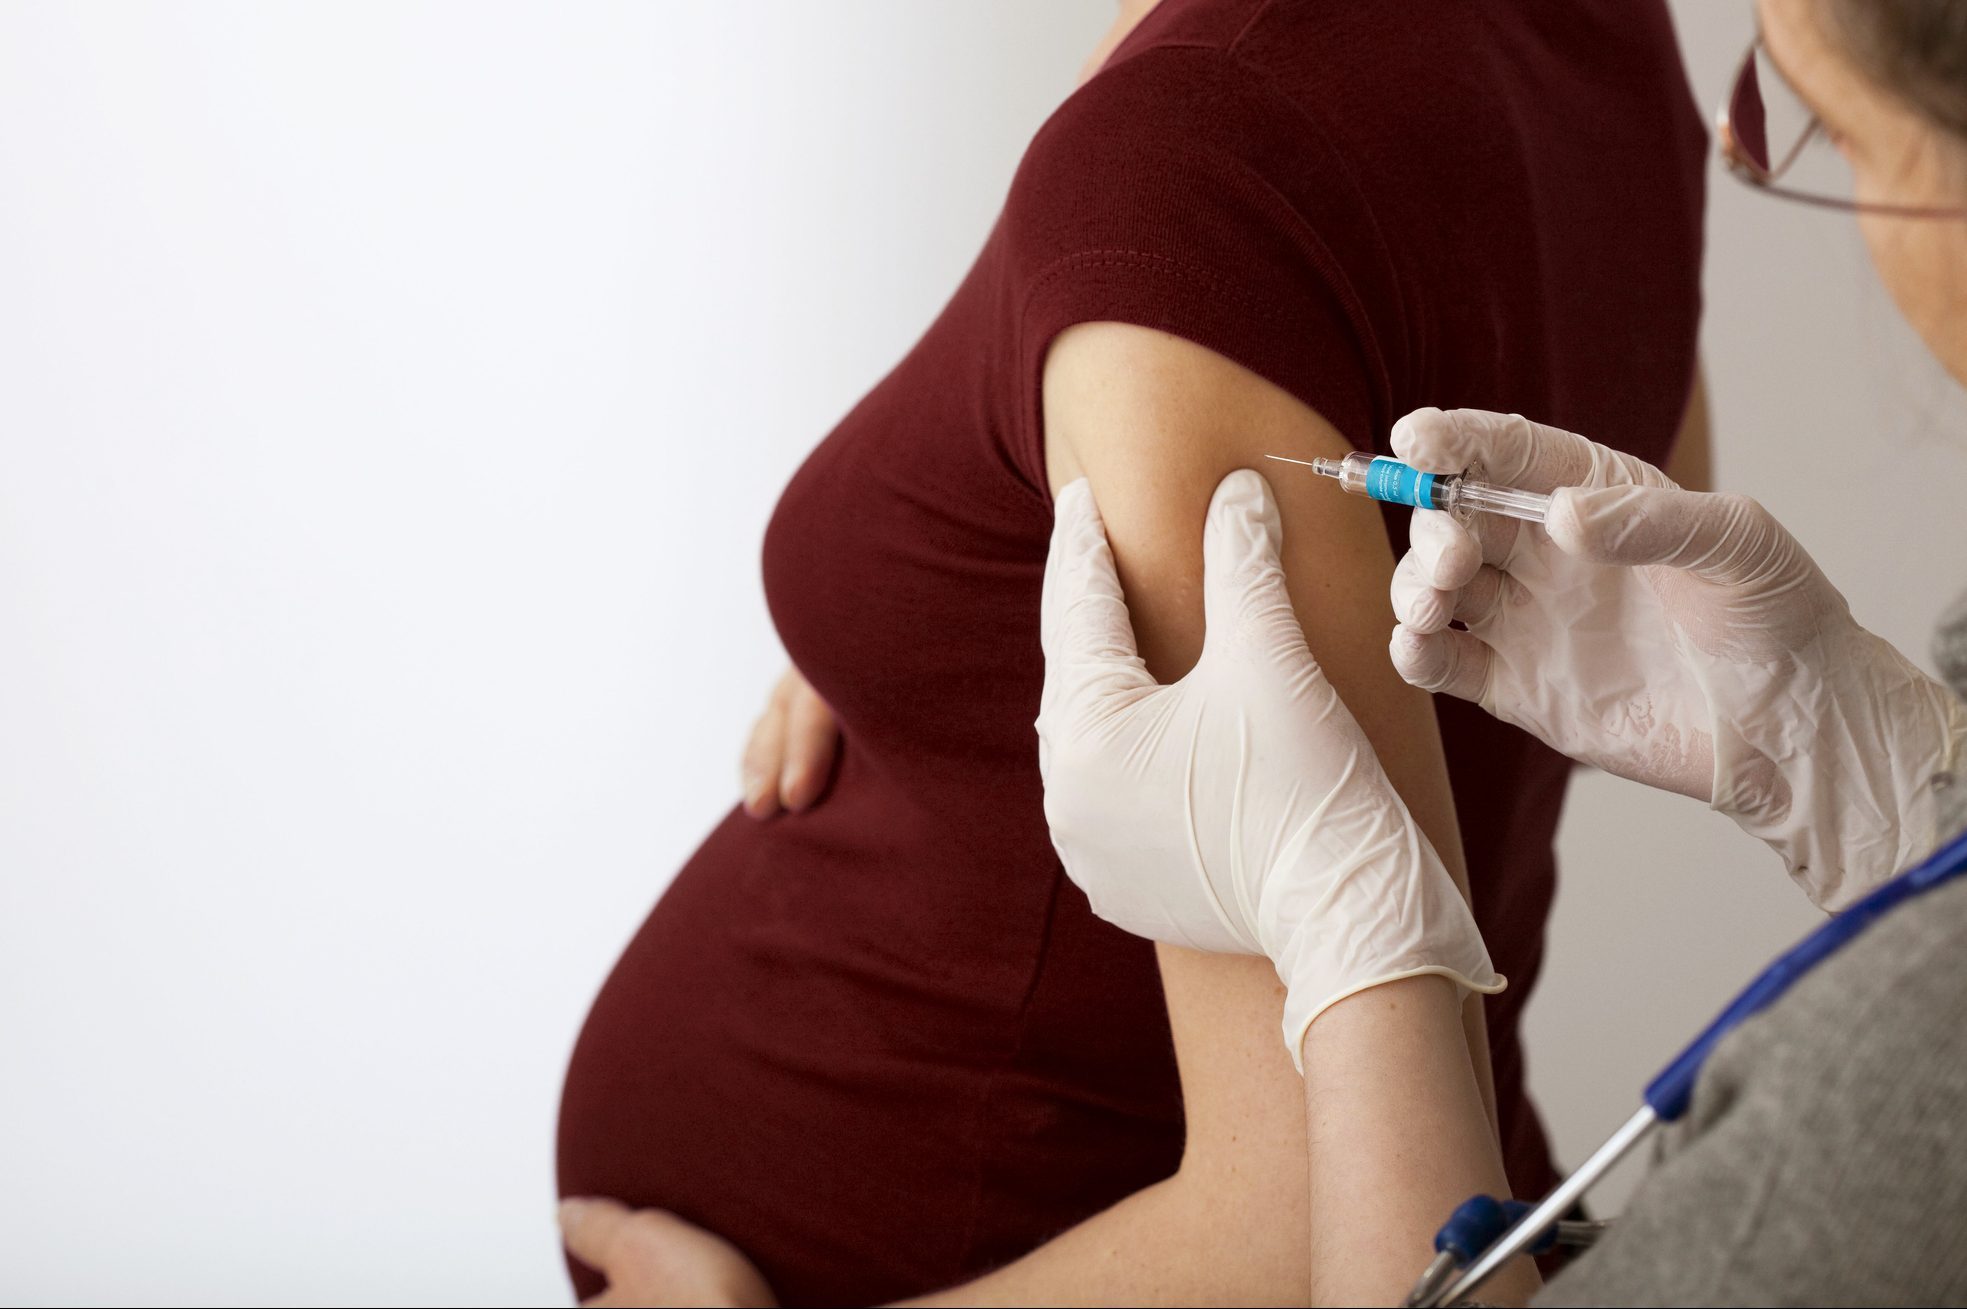 6 Things to Know About the Tdap Vaccine in Pregnancy